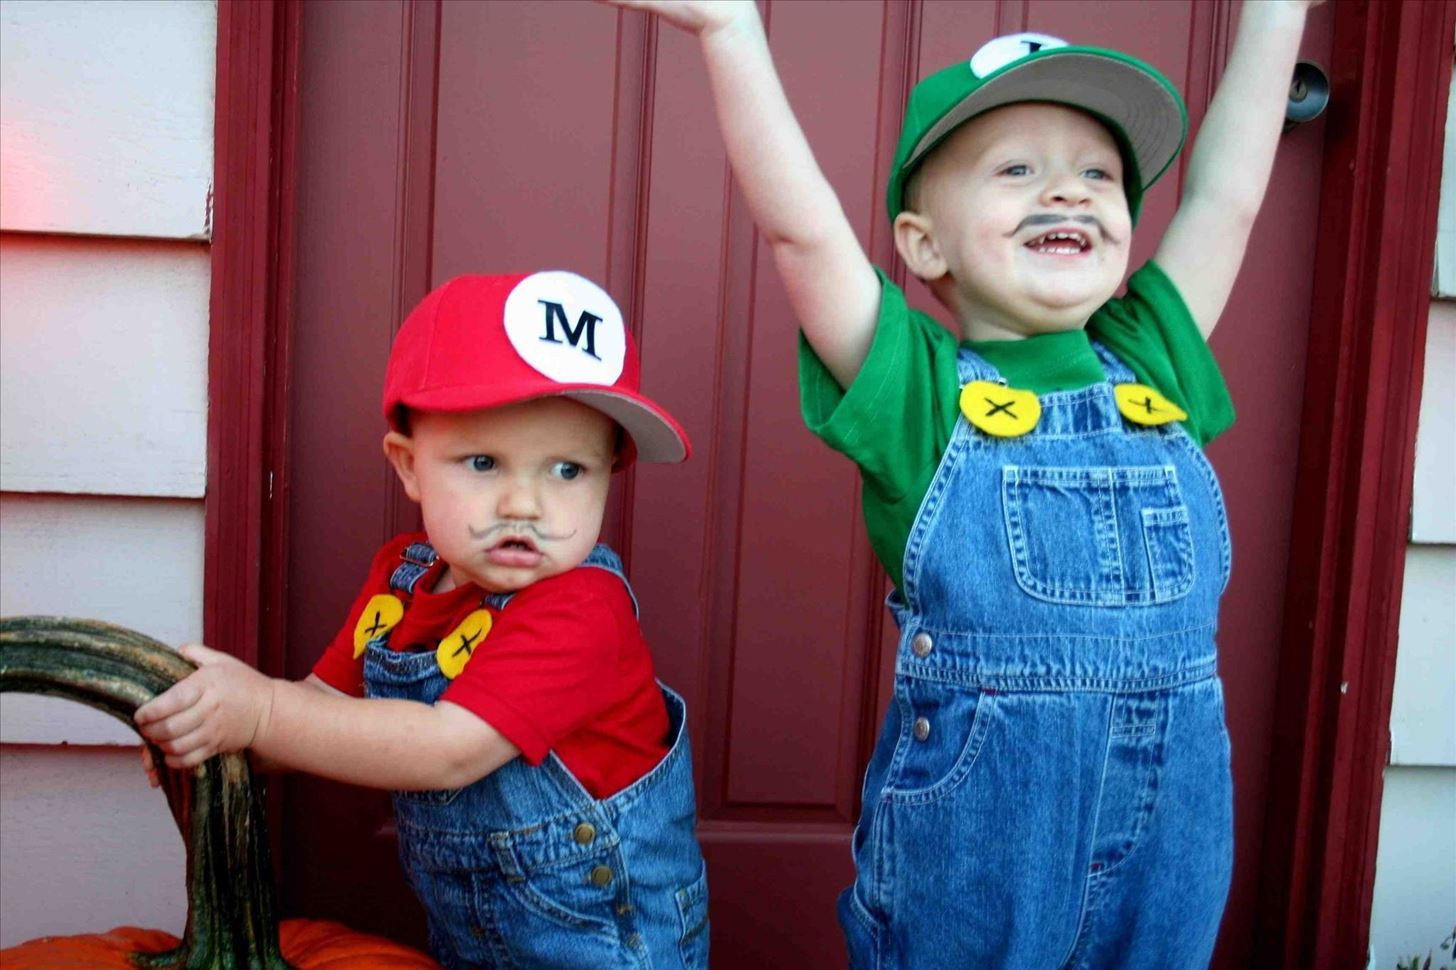 Easy DIY Halloween Costumes For Kids
 10 Cheap Easy & Awesome DIY Halloween Costumes for Kids